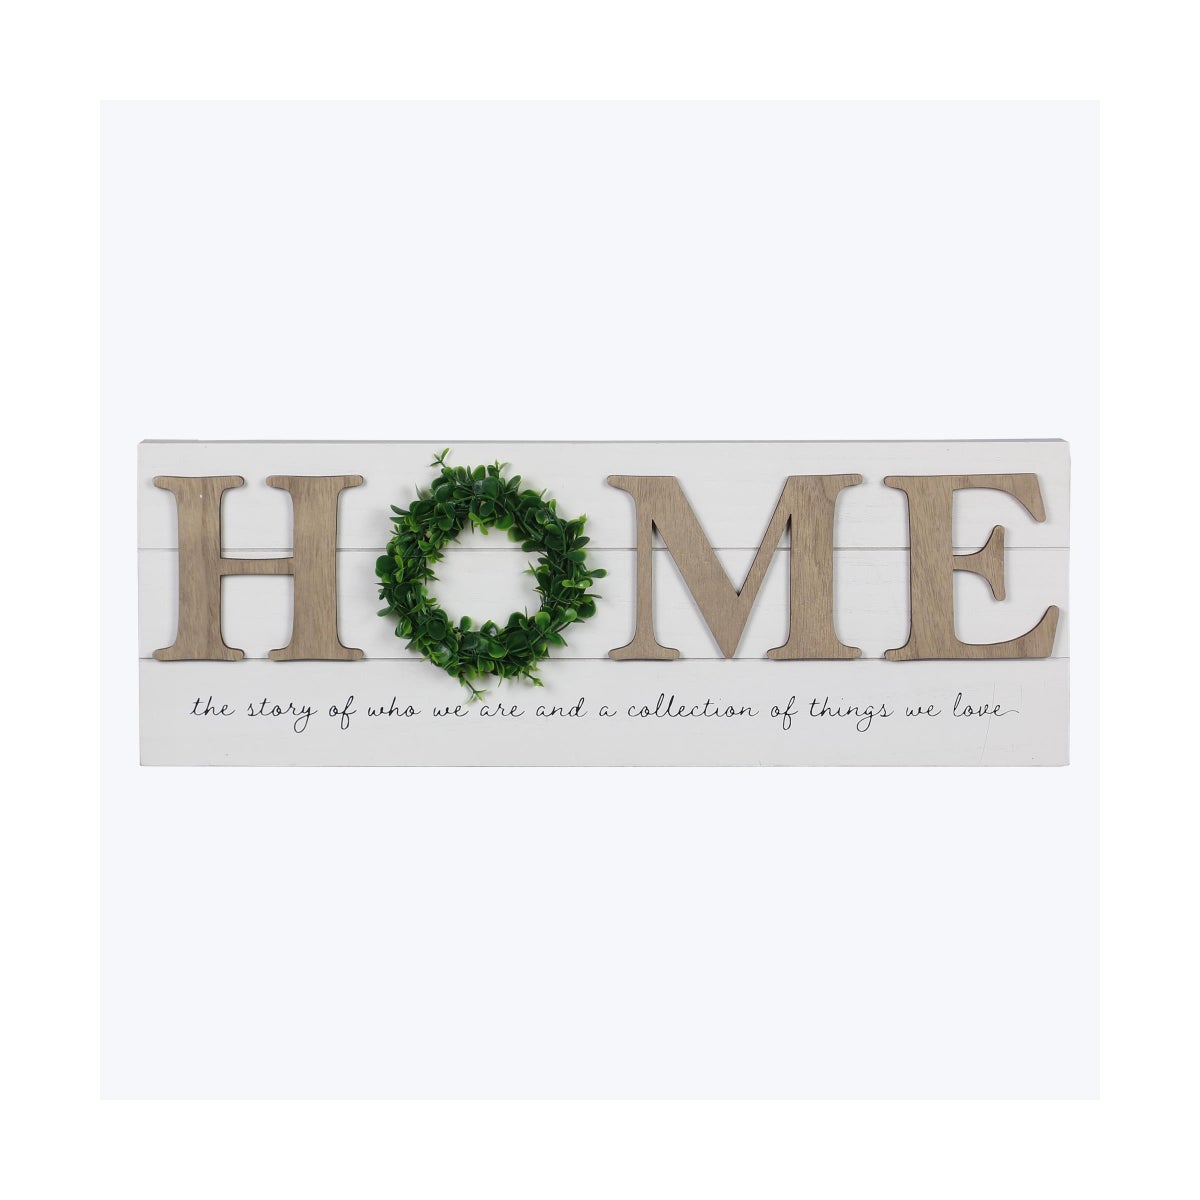 Wood Cottage Home/Wall Tabletop Sign with Artificial Wreath